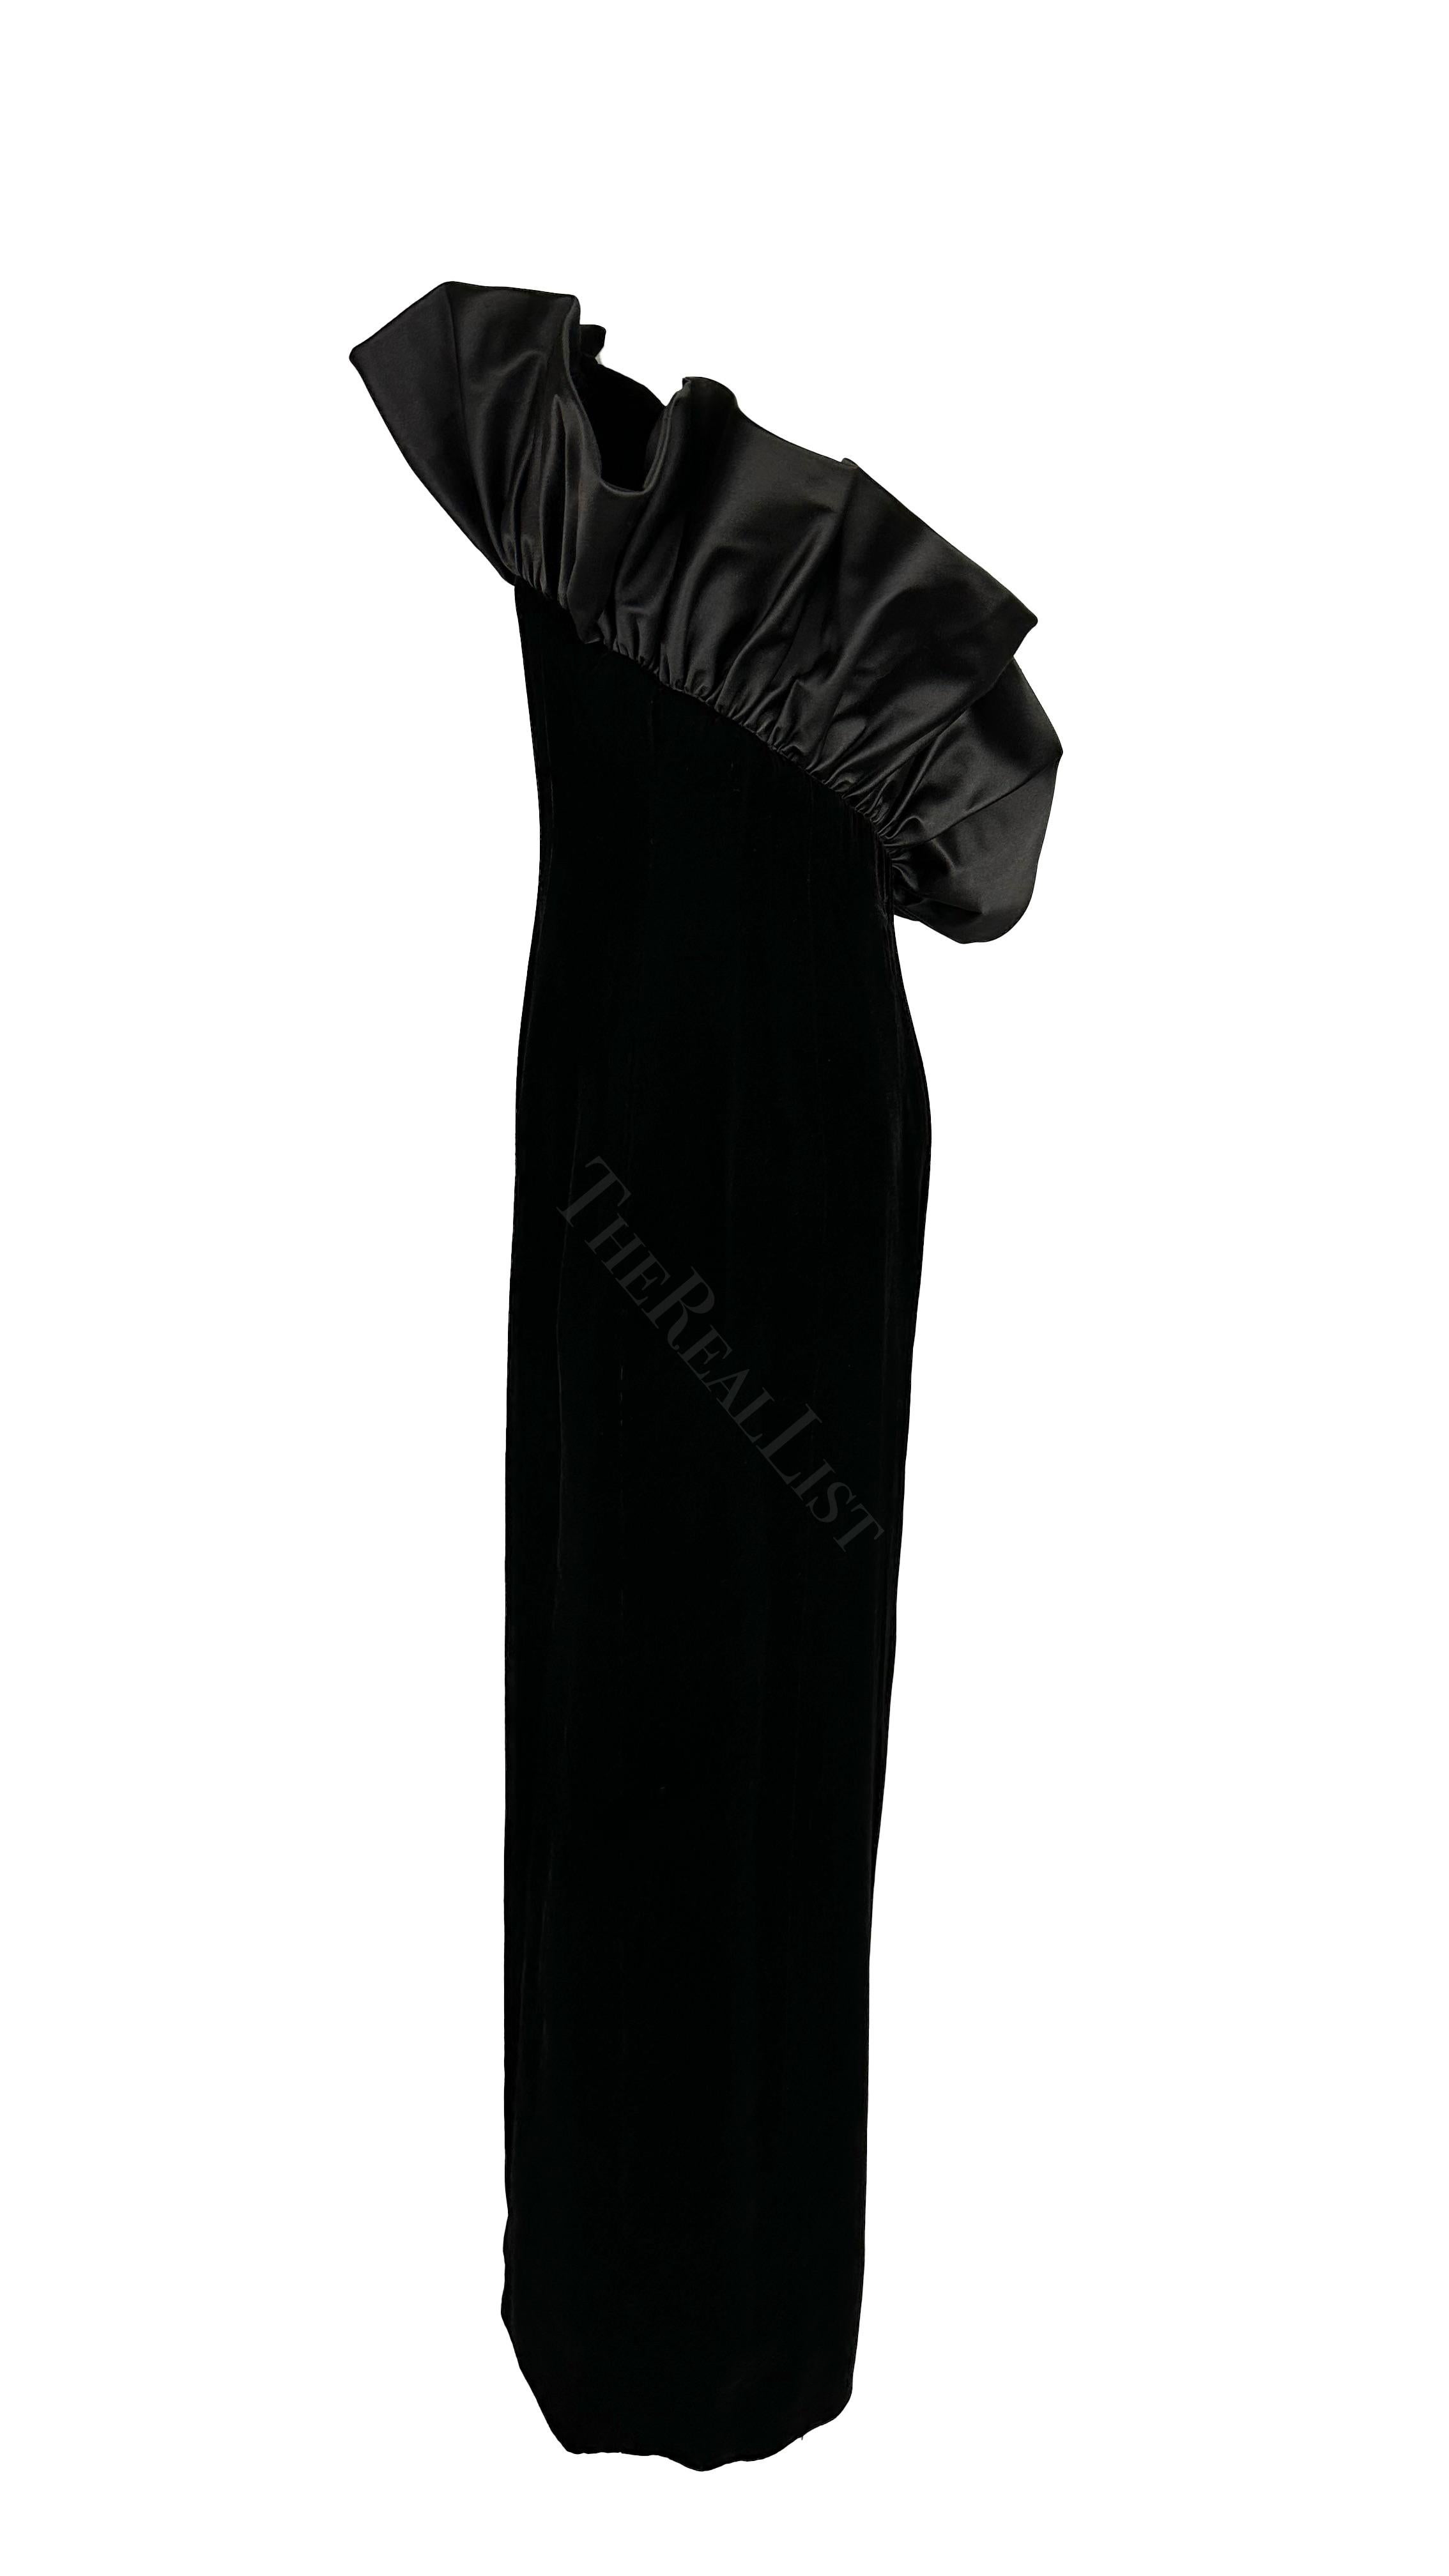 F/W 1987 Givenchy Black Velvet Sculptural Rhinestone Strapless Gown For Sale 1